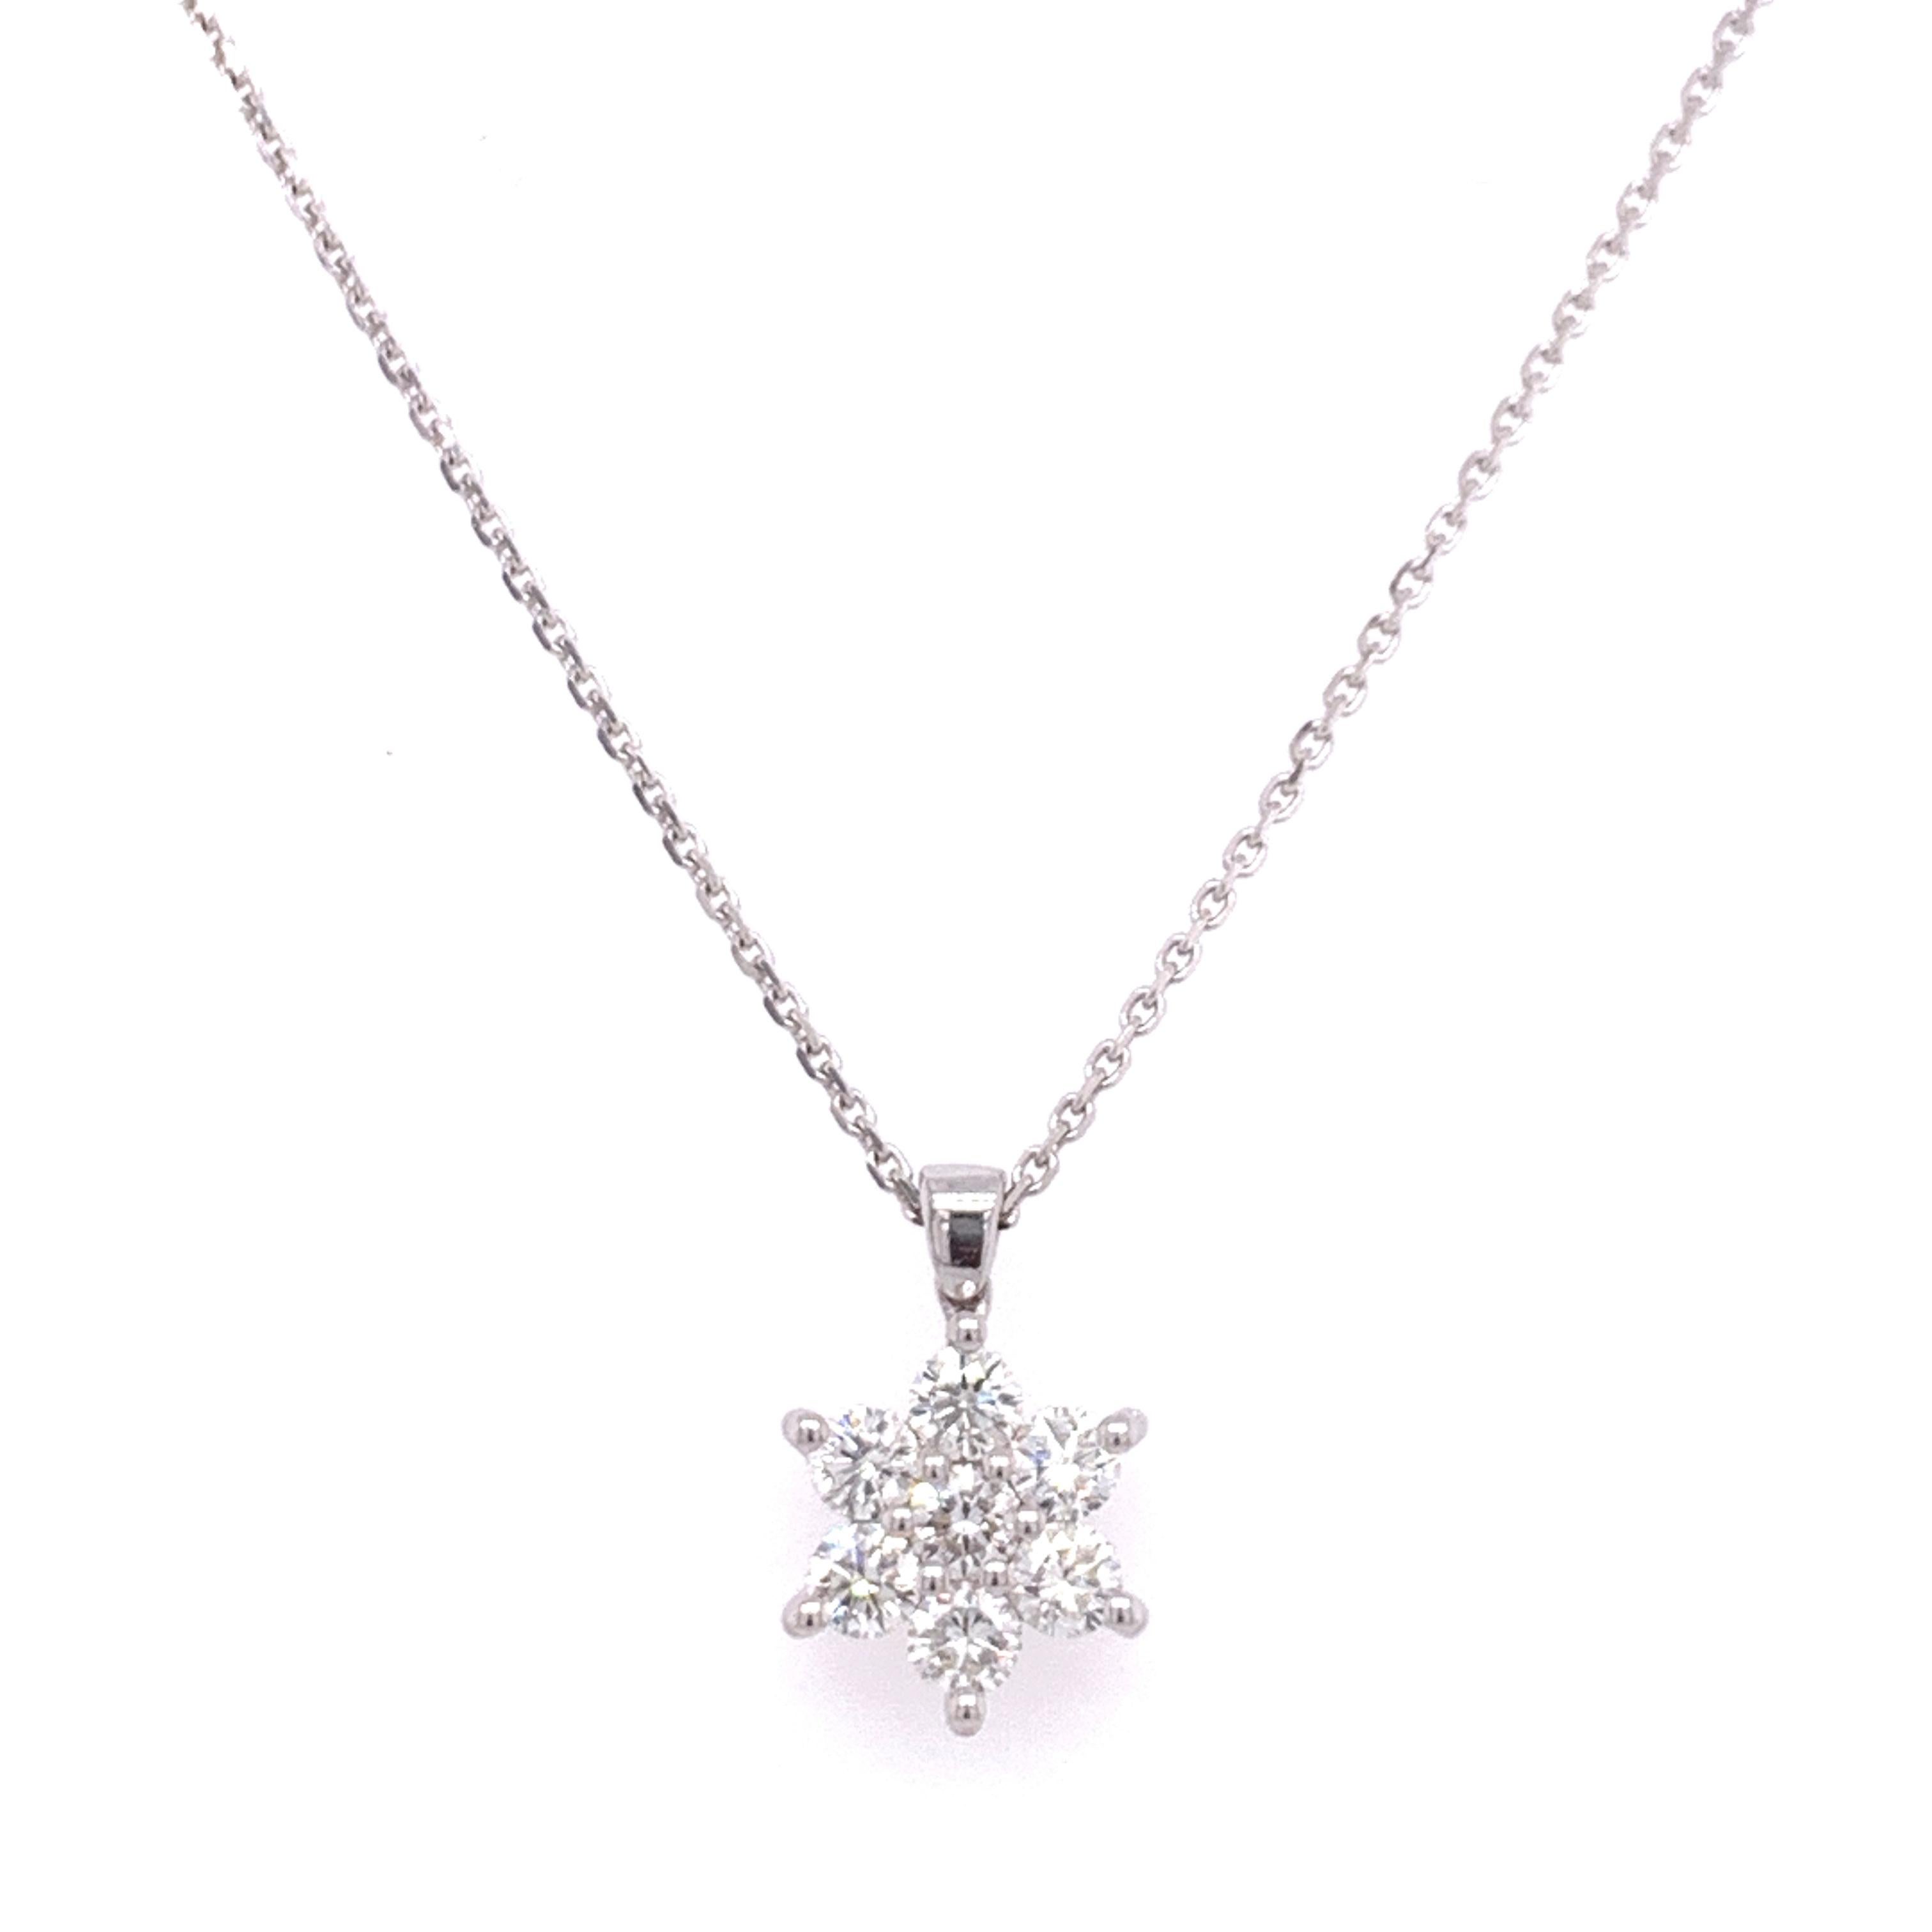 Flower shaped diamond pendant necklace made with natural/brilliant cut diamonds. Total Diamond Weight: 0.62 carats. Diamond Quantity: 7 round diamonds. Color: G. Clarity: VS. Mounted on 18 karat gold adjustable chain.